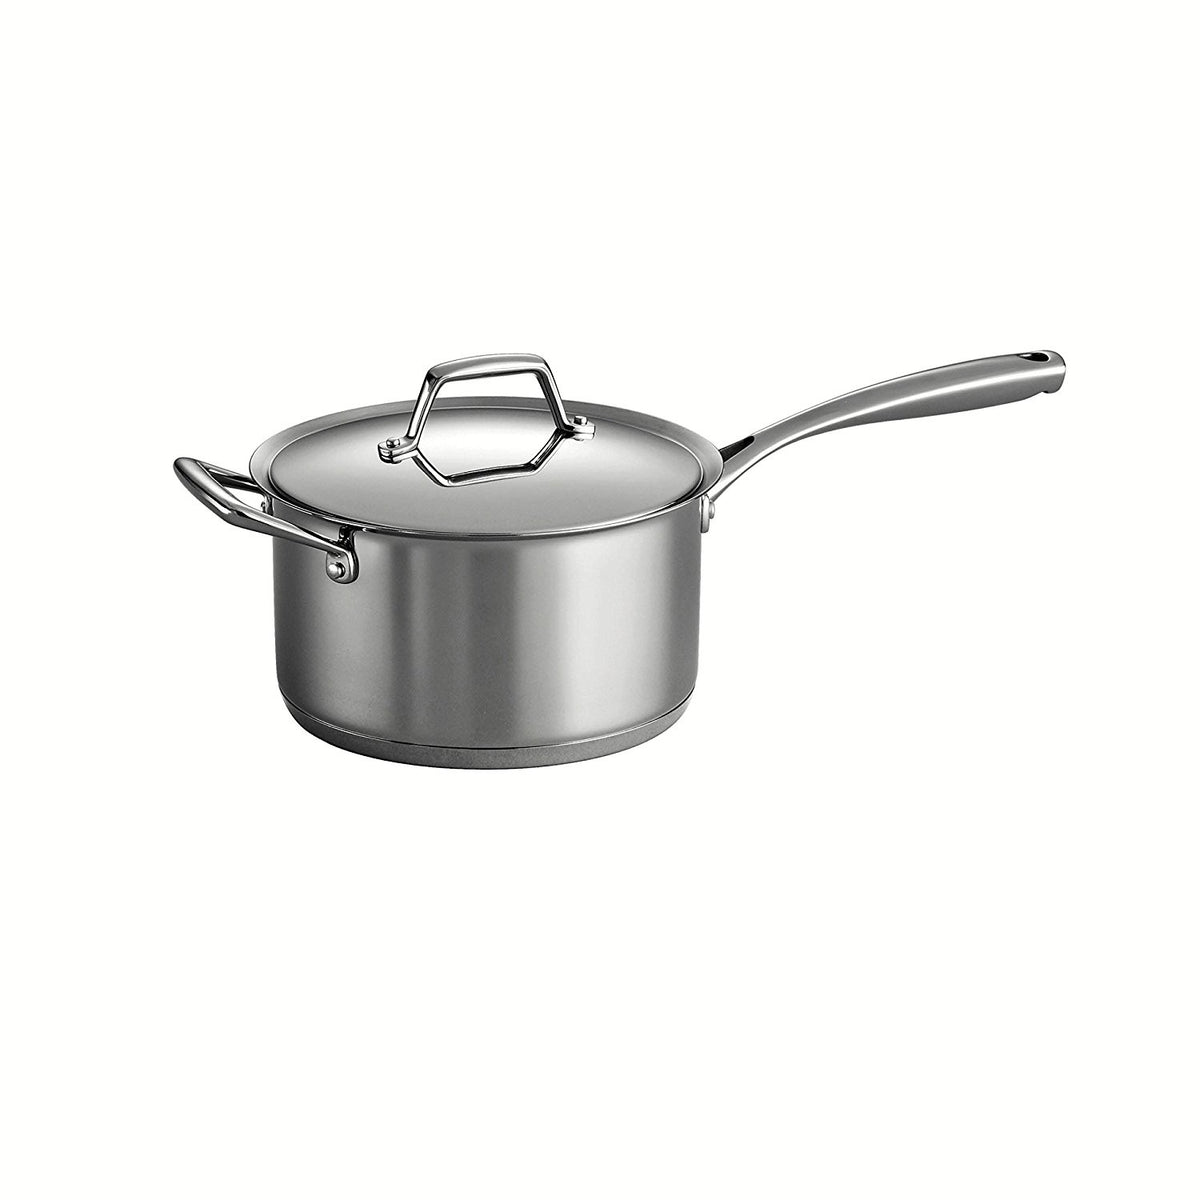 Tramontina 80101-026DS 4QT Gourmet Prima 18/10 Tri-Ply Base Covered Sauce Pan, Stainless Steel - Induction Ready, Dishwasher Safe, Oven Safe COOKPOT